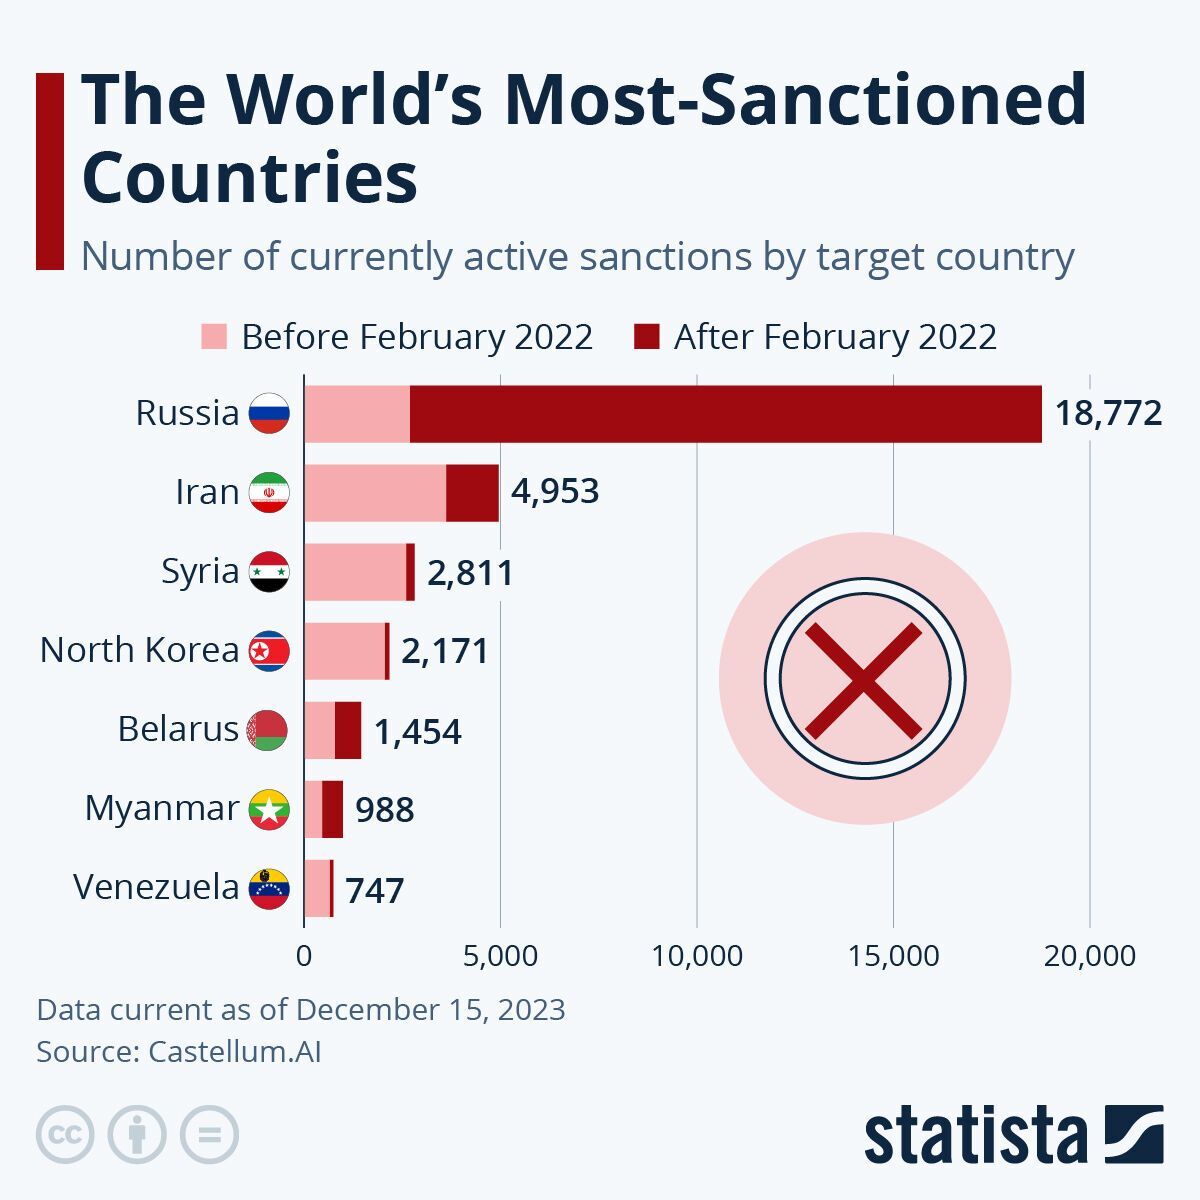 How many sanctions have been imposed on Russia